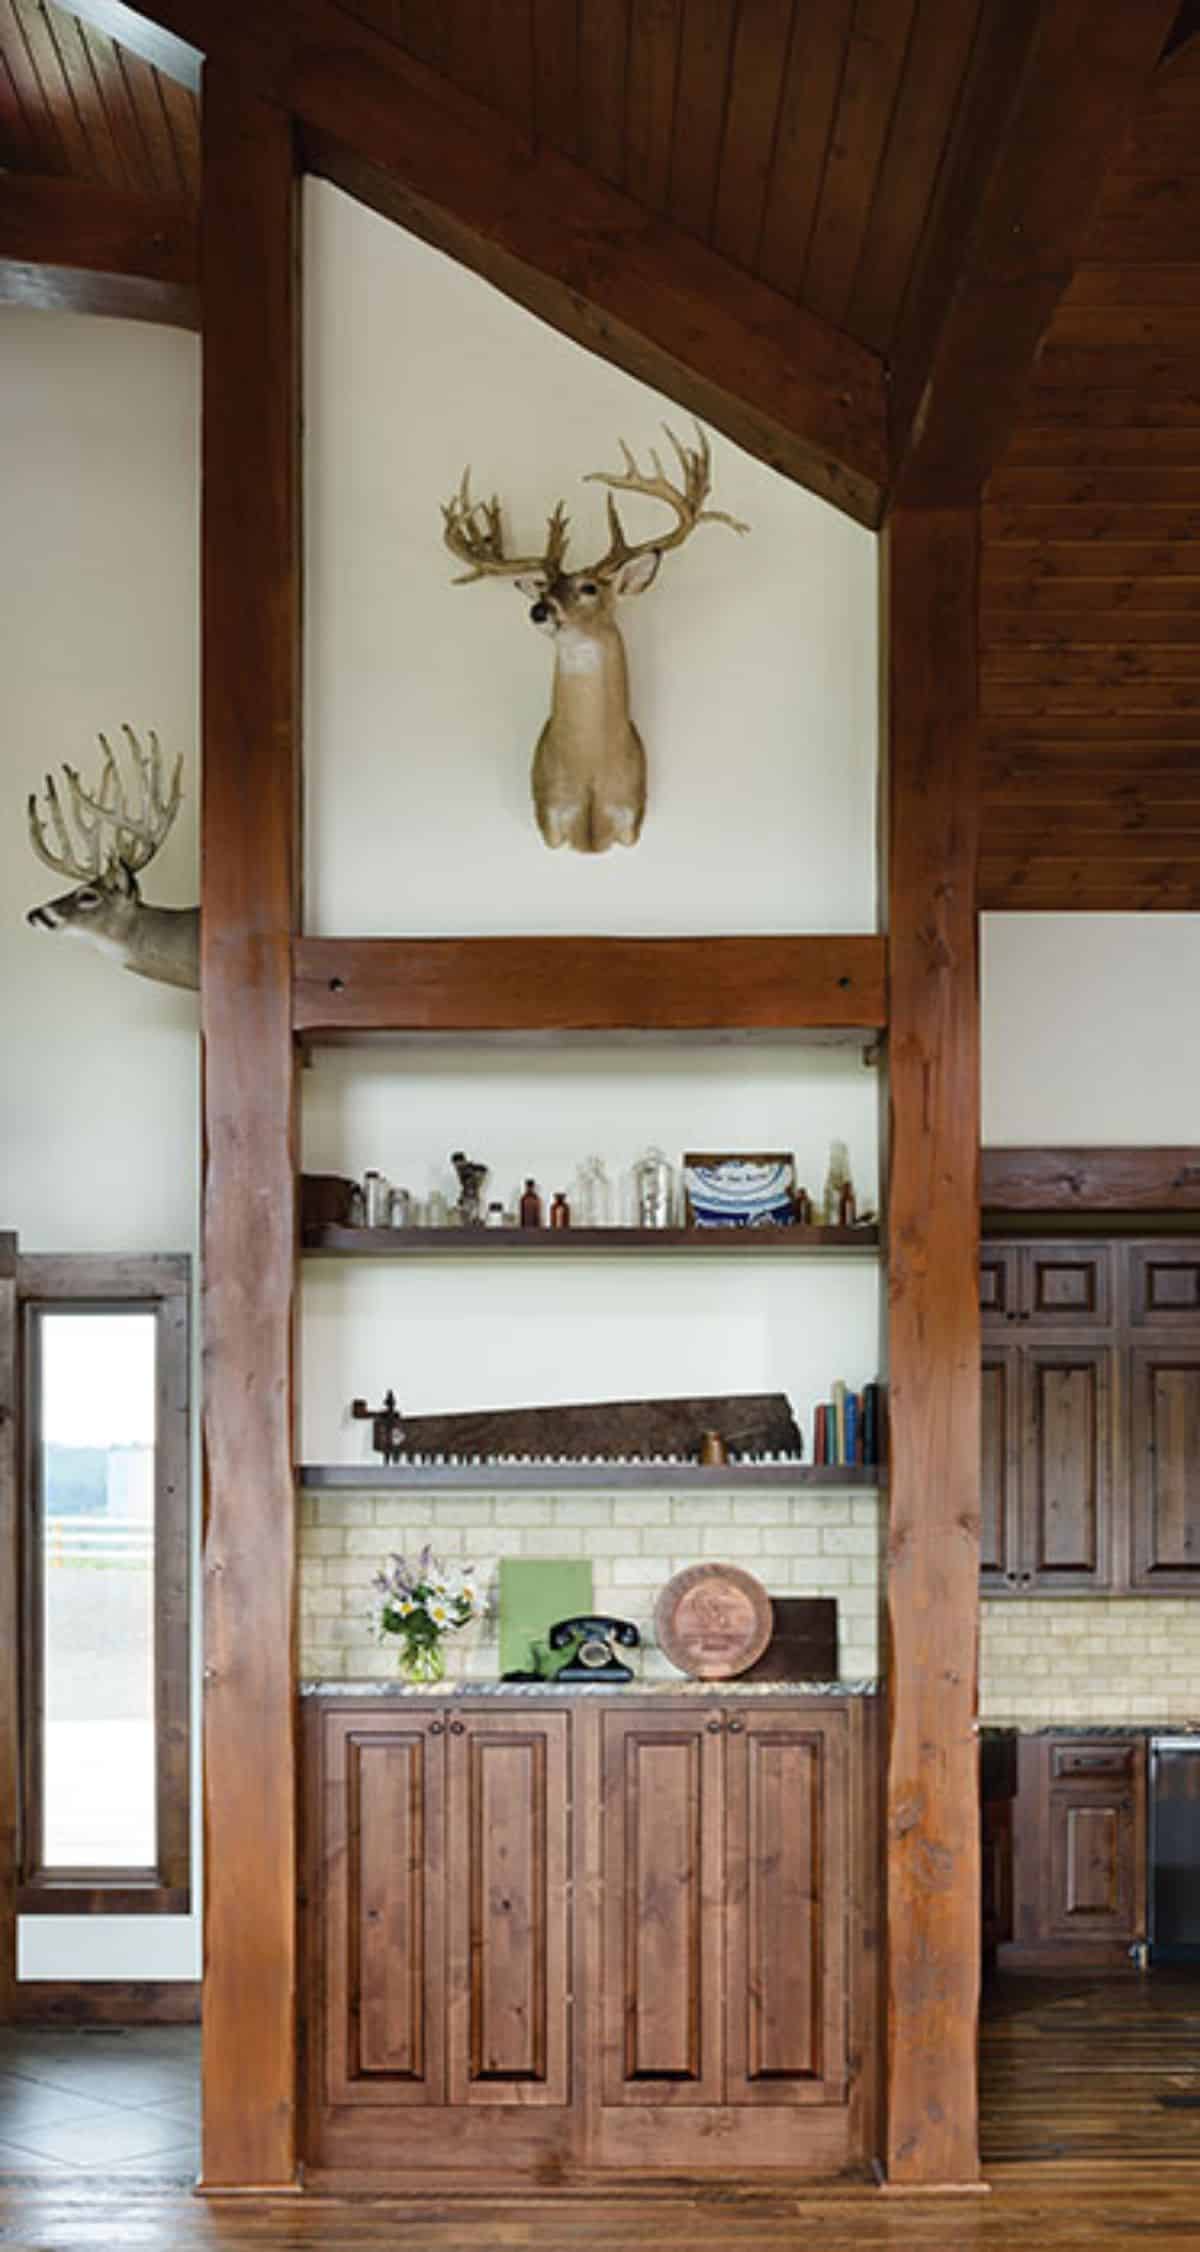 open shelving against white wall with deer head mounted on wall